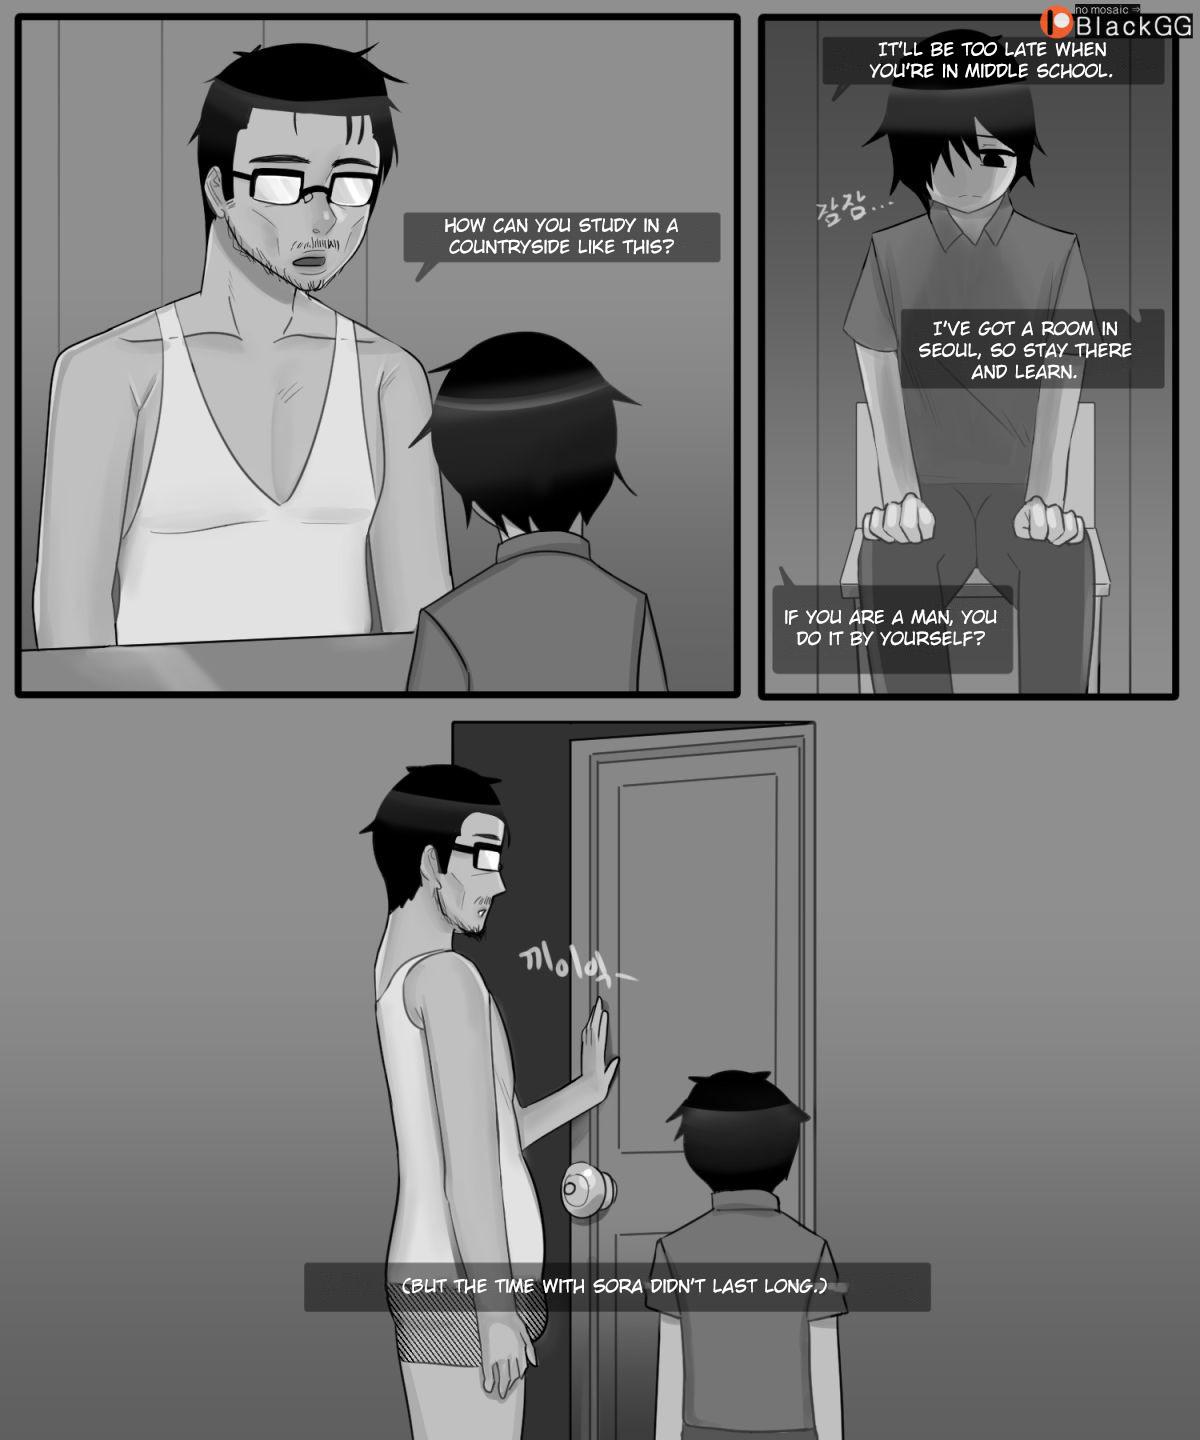 Hardcore Gay The story of a childhood friend becoming father's lover 1 - Original Public Nudity - Page 4